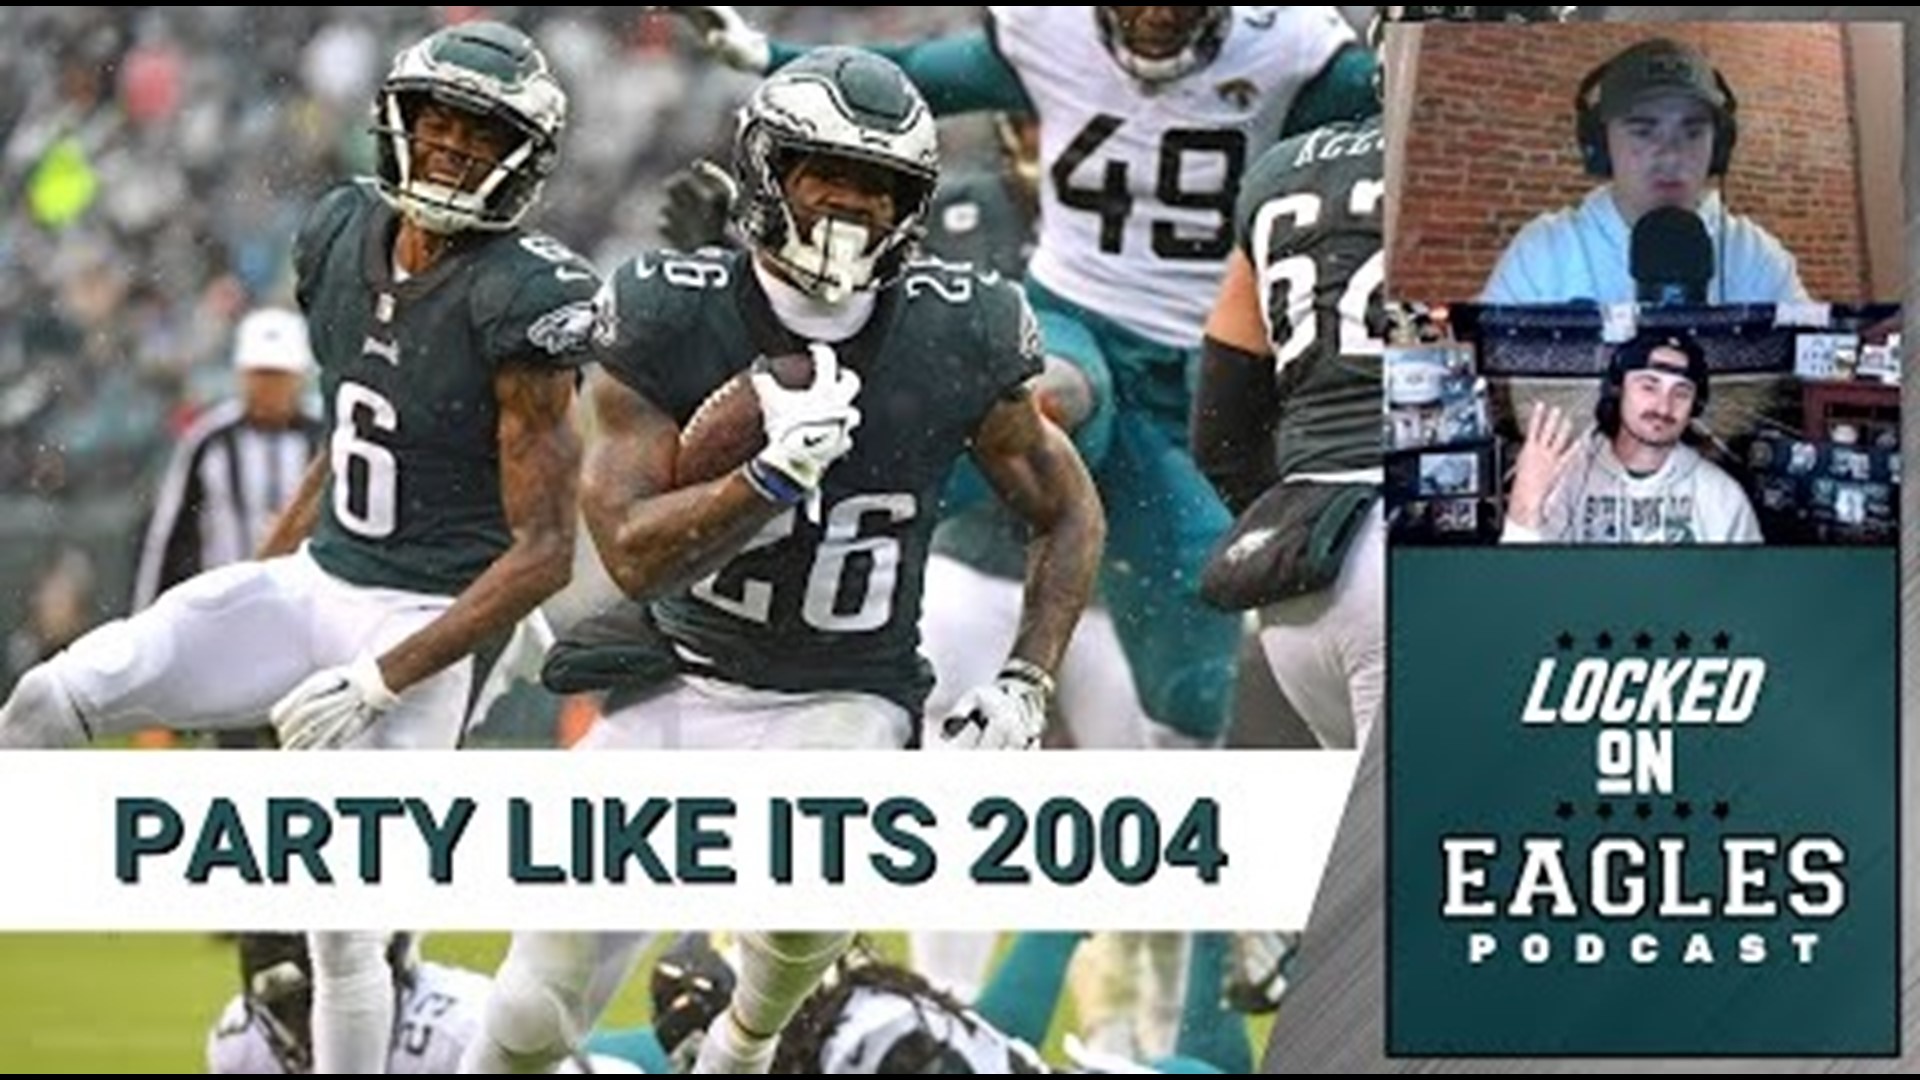 The Philadelphia Eagles are out to a 4-0 start for the first time since Donovan McNabb and Terrell Owens lead the team to the Super Bowl in 2004.